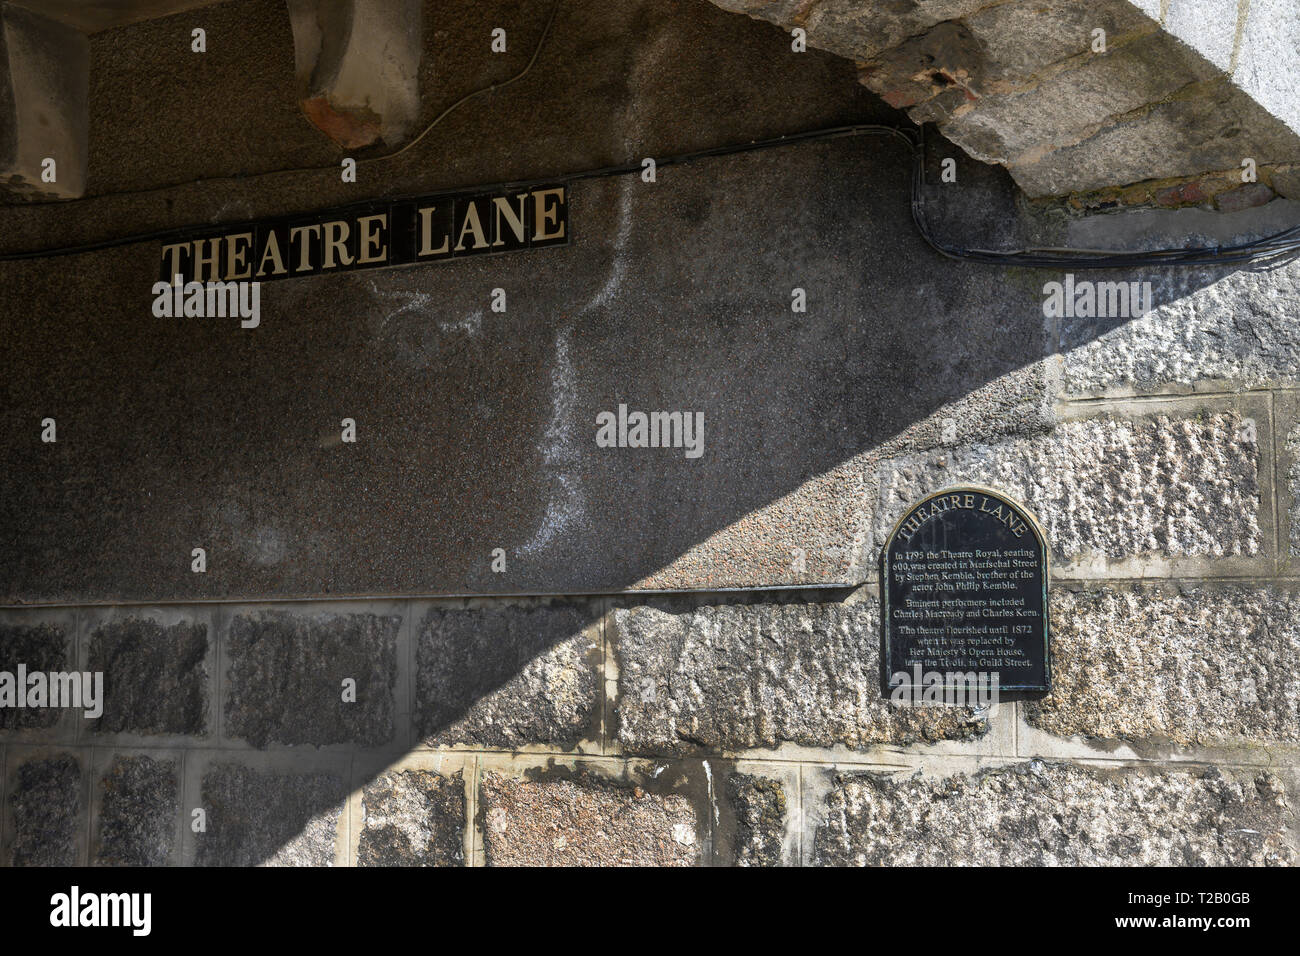 Entrance to Theatre Lane from Regent Quay, Aberdeen City Centre, Aberdeen, Aberdeenshire, Scotland, UK showing name plate and heritage plaque. Stock Photo